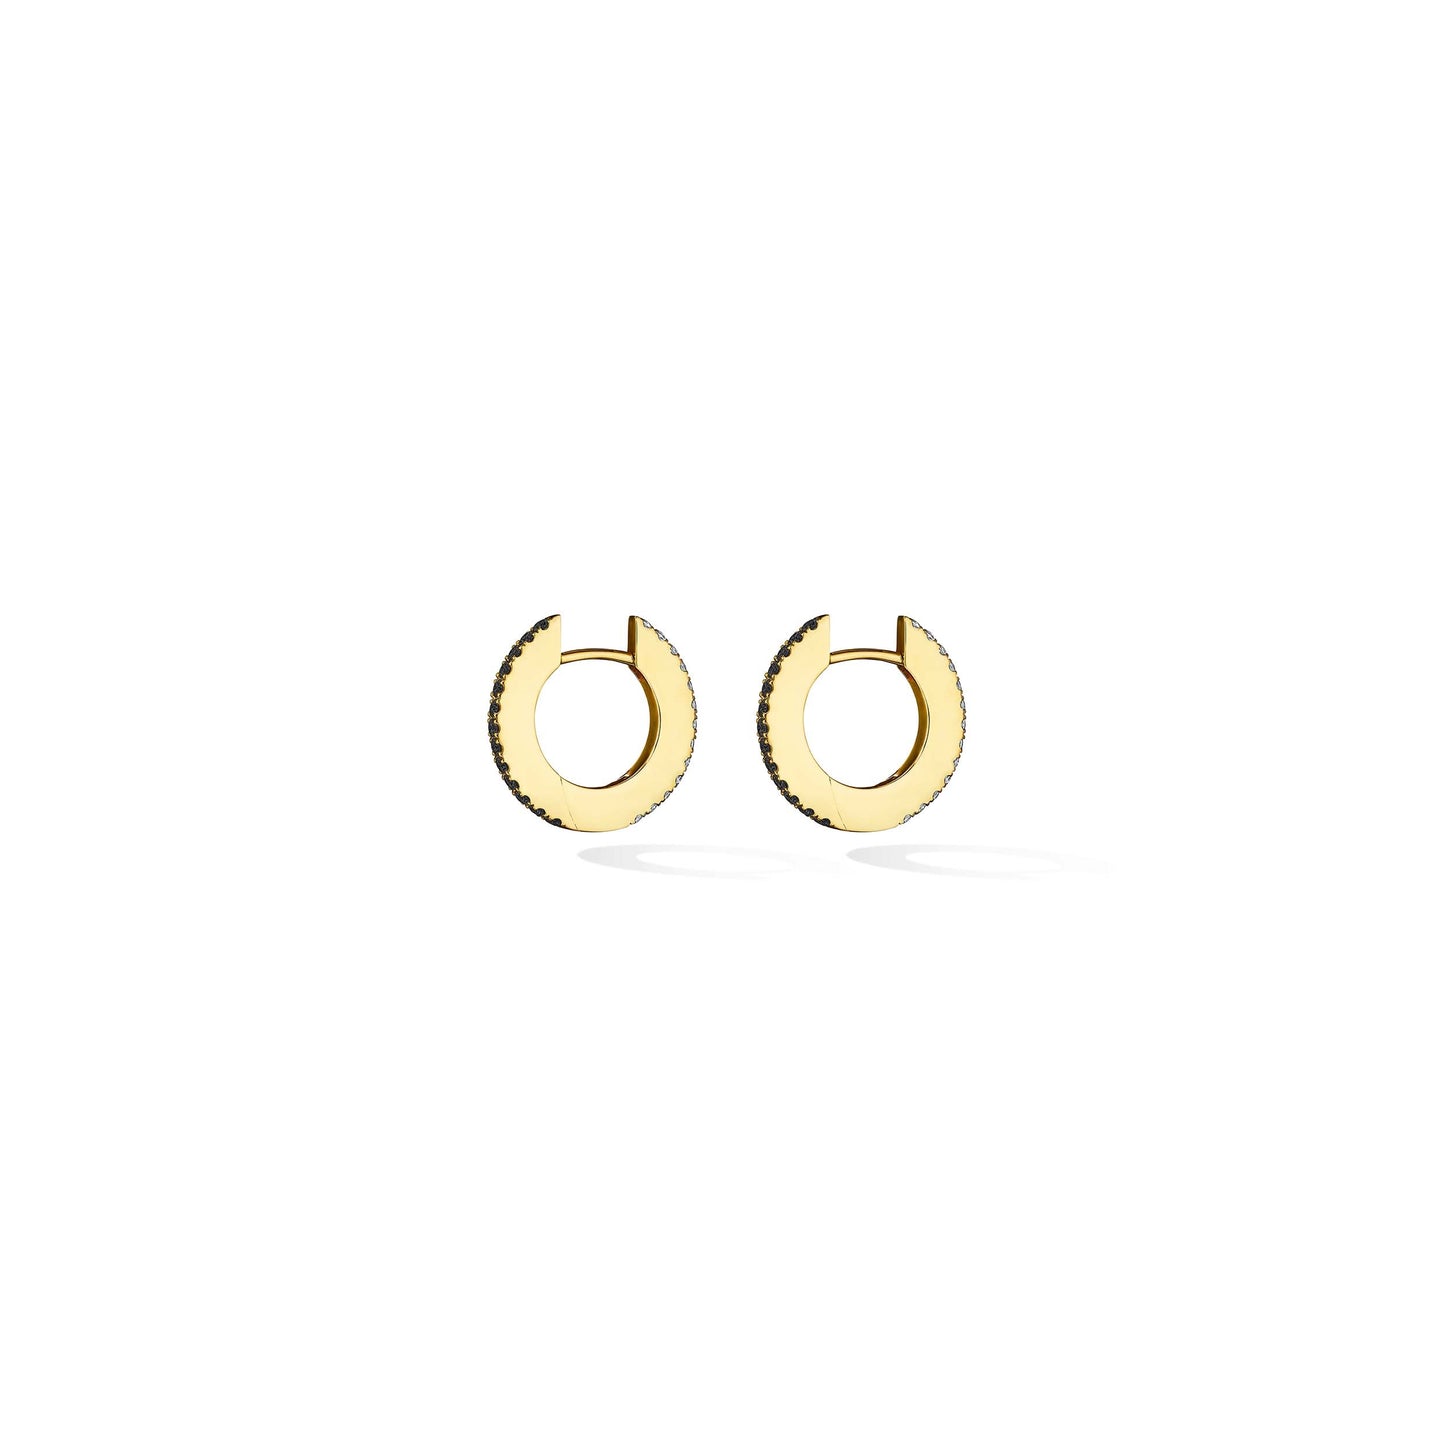 Small Yellow Gold Solo Hoop Earrings with Black and White Diamonds